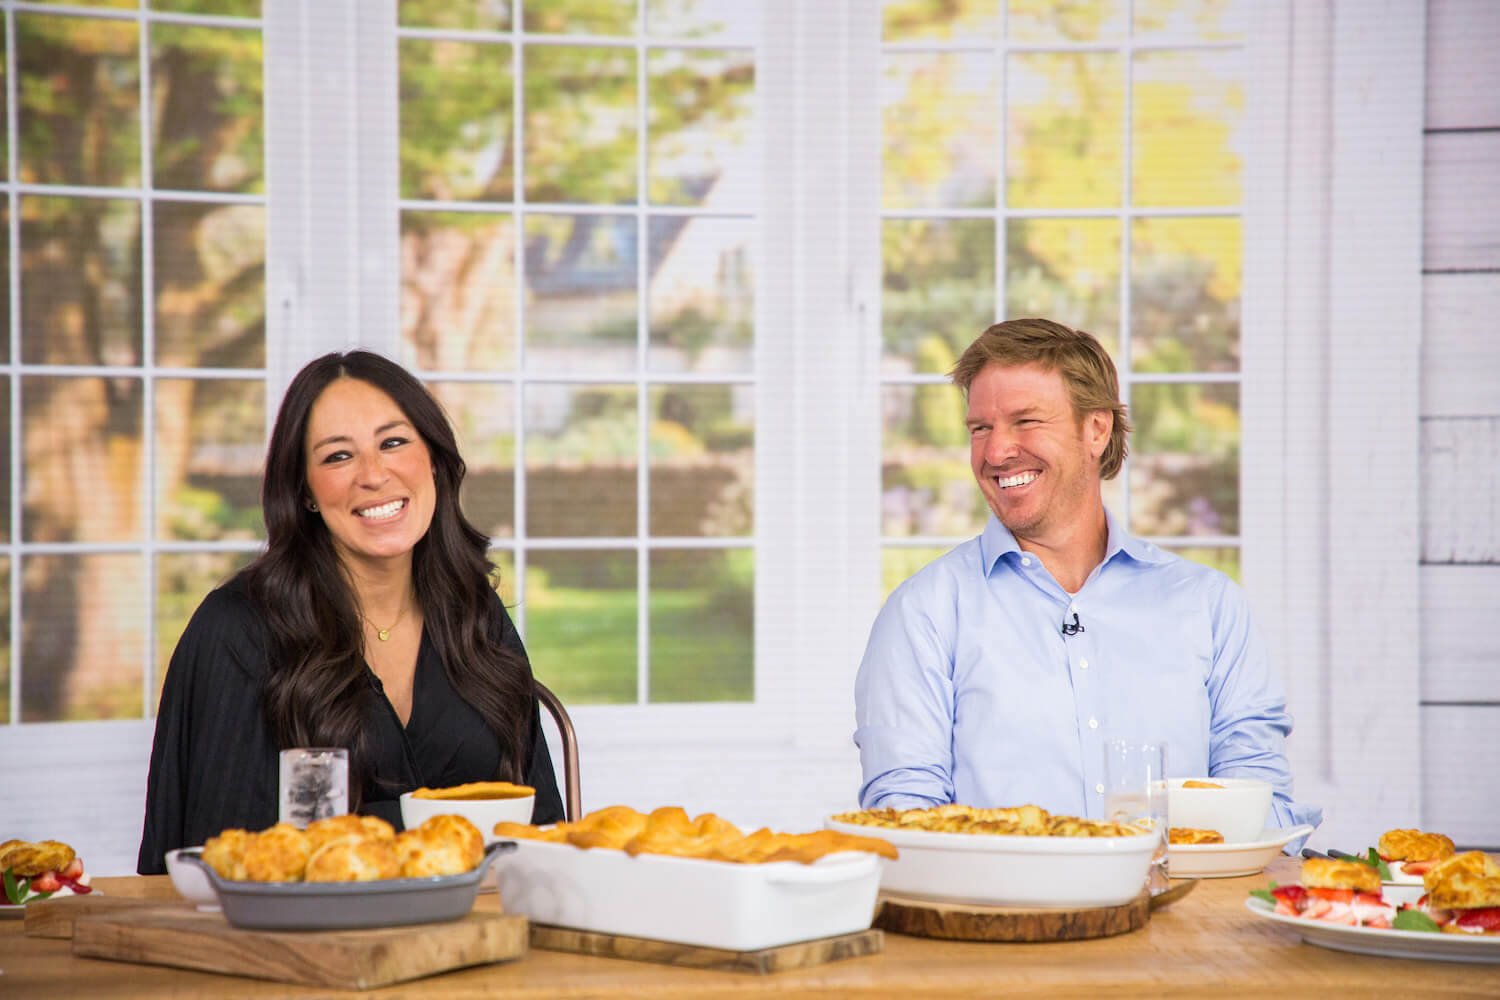 Joanna Gaines and Chip Gaines smiling while sitting at a table full of food